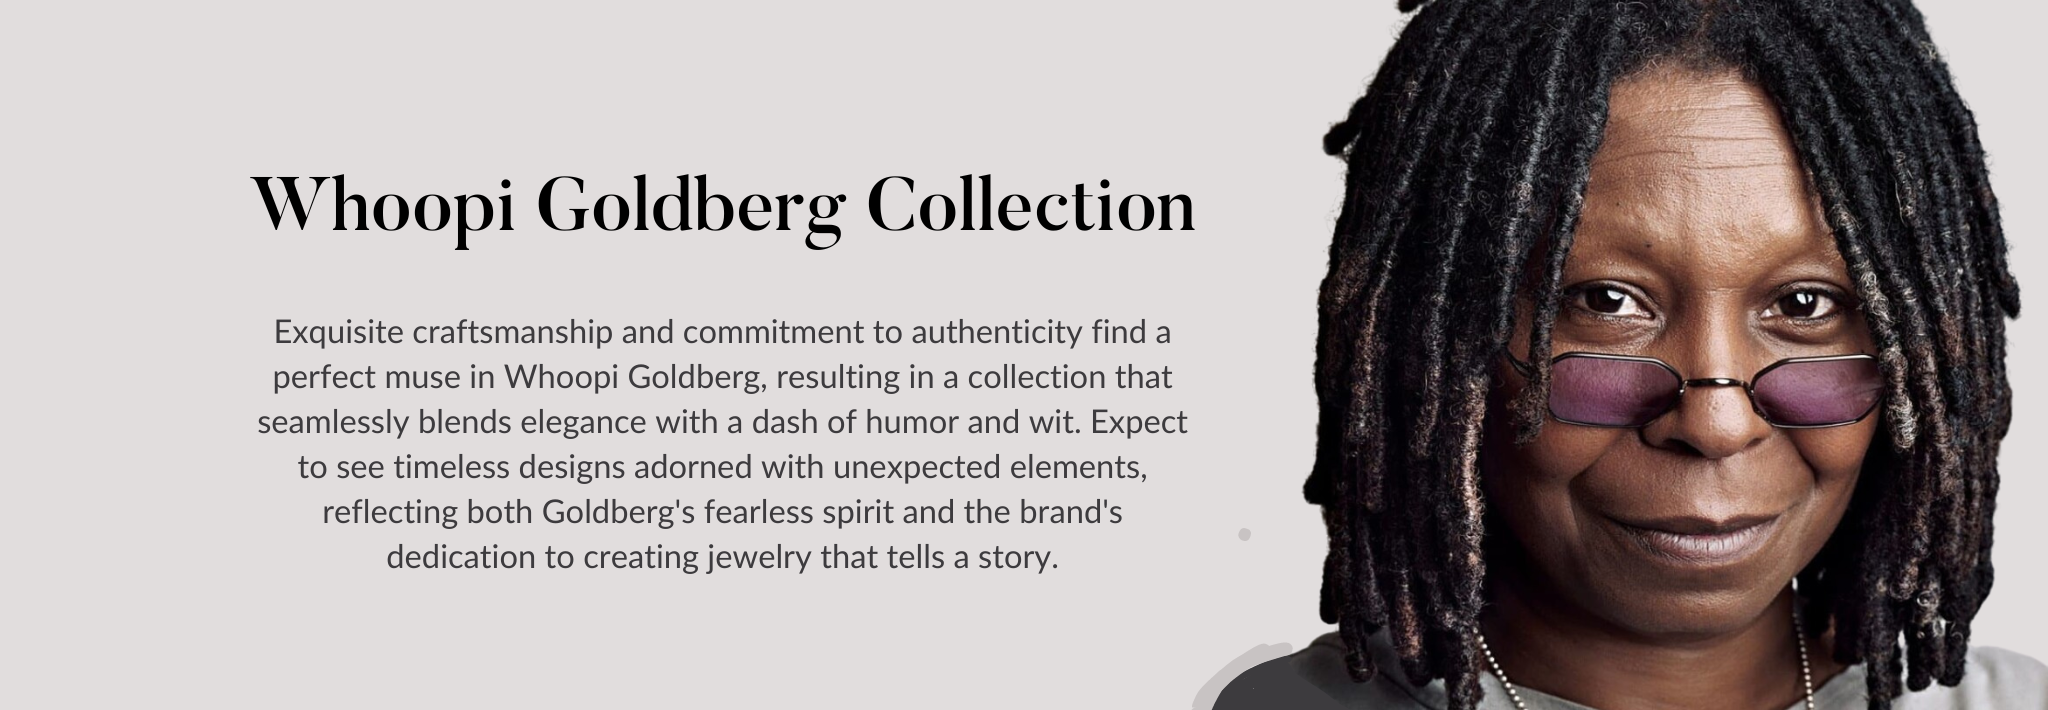 Whoopi Goldberg Collection Banner